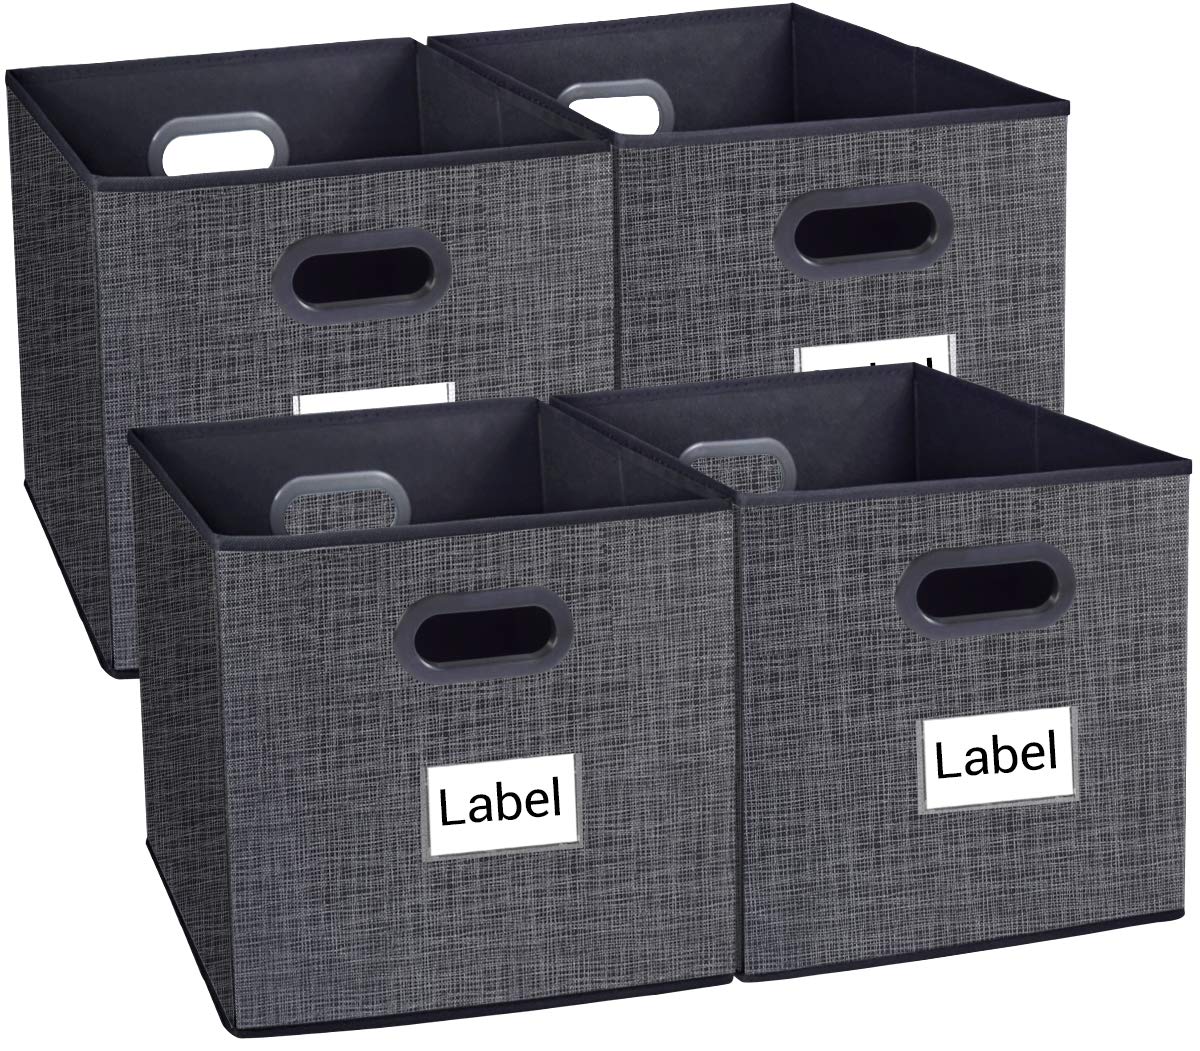 Homyfort Cloth Storage Bins, Foldable Basket Cubes Organizer Container Drawers with Dual Plastic Handles for Closet, Bedroom, Toys, 6 Pack,Stripe Large(12x12x12 in)